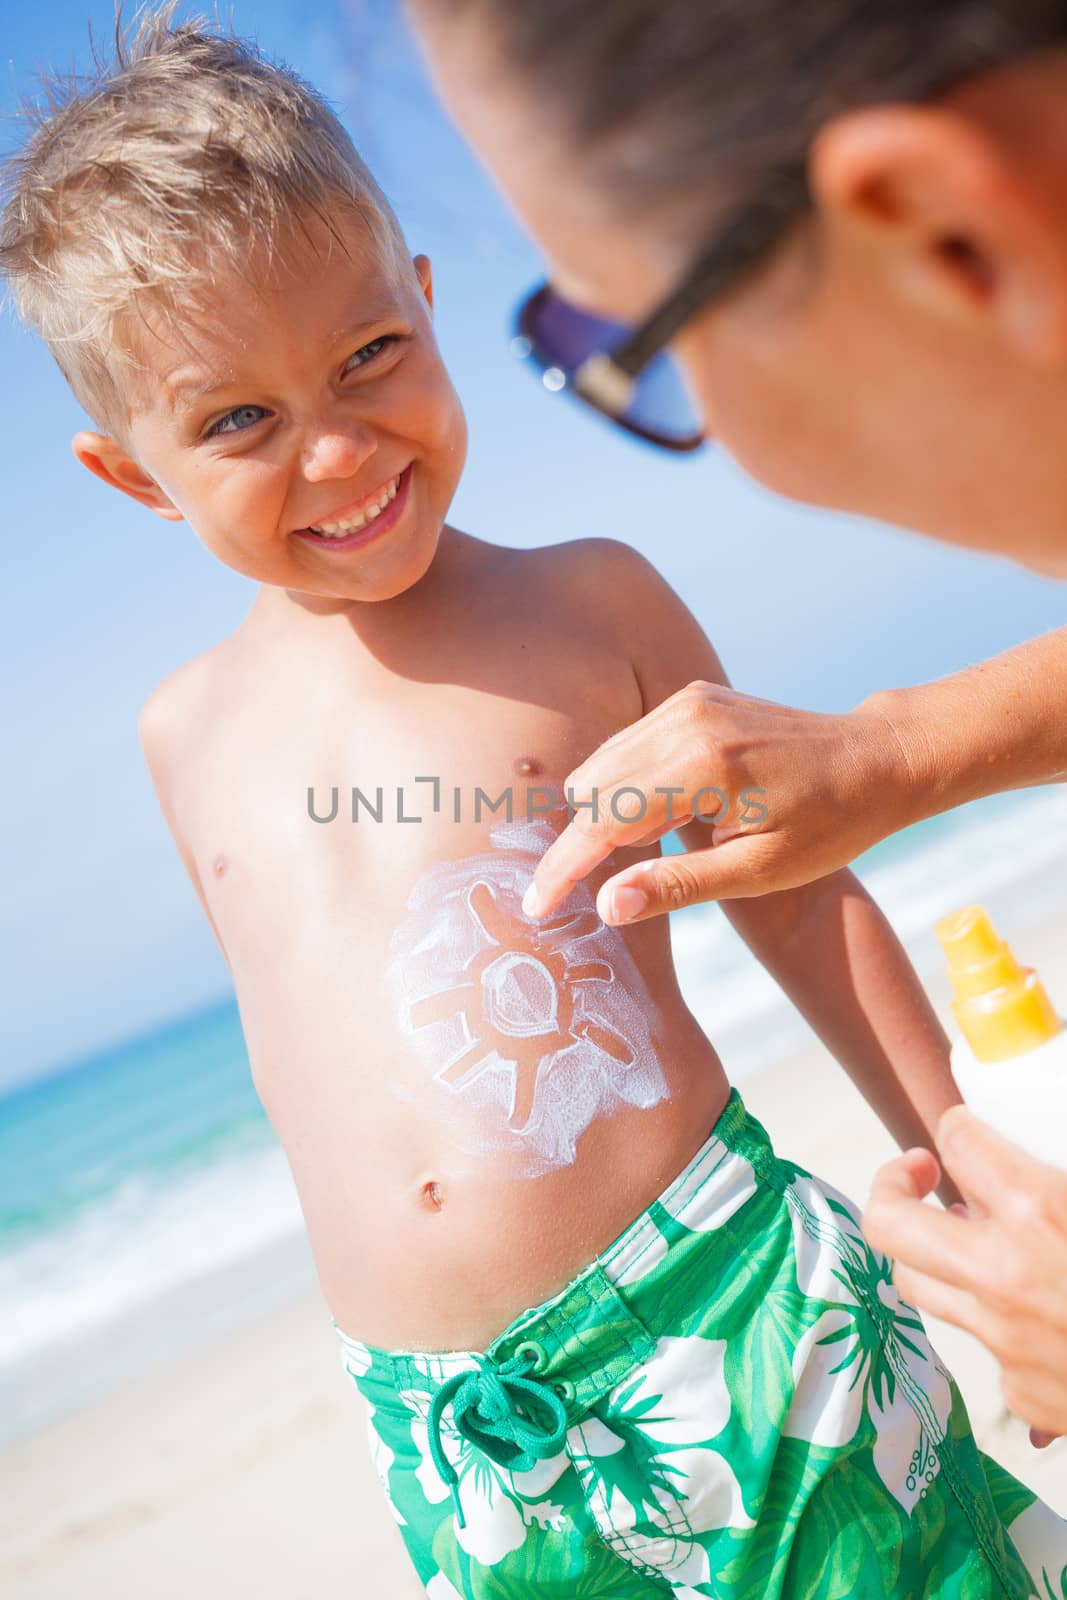 Adorable boy and mother at tropical beach applying sunblock cream.